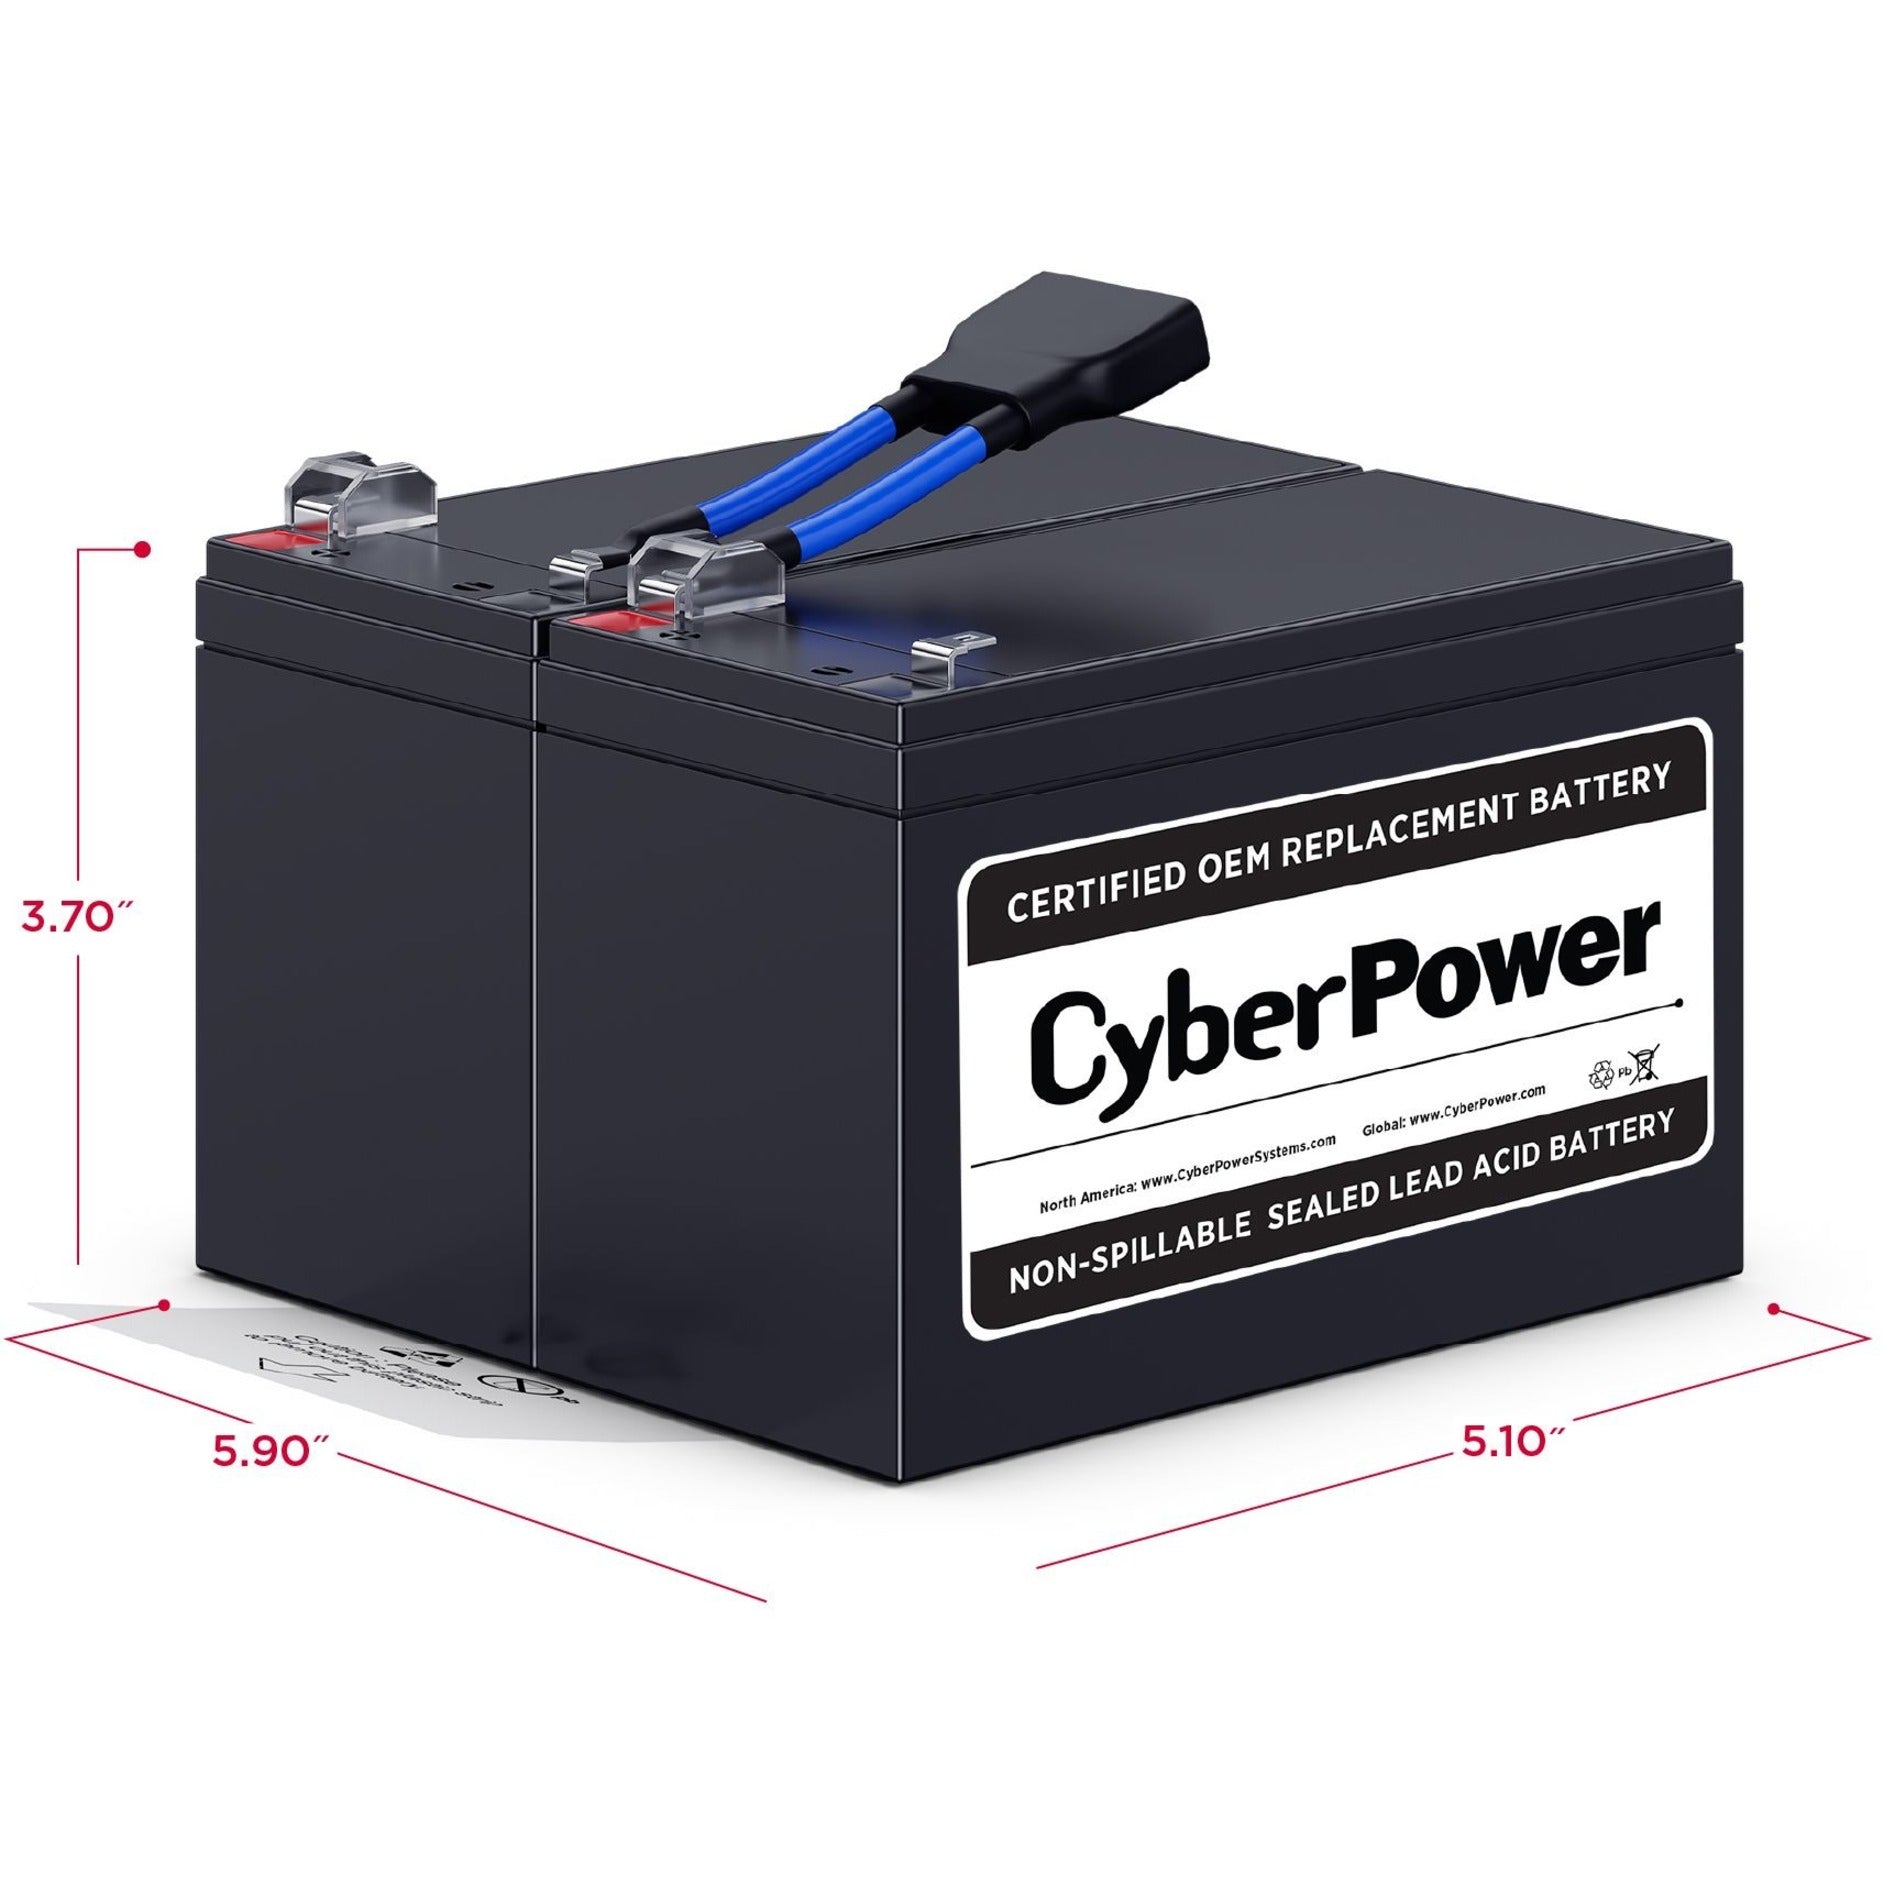 CyberPower RB1290X2B Replacement Battery Kit, 12V DC, 9000mAh, Lead Acid, Leak Proof